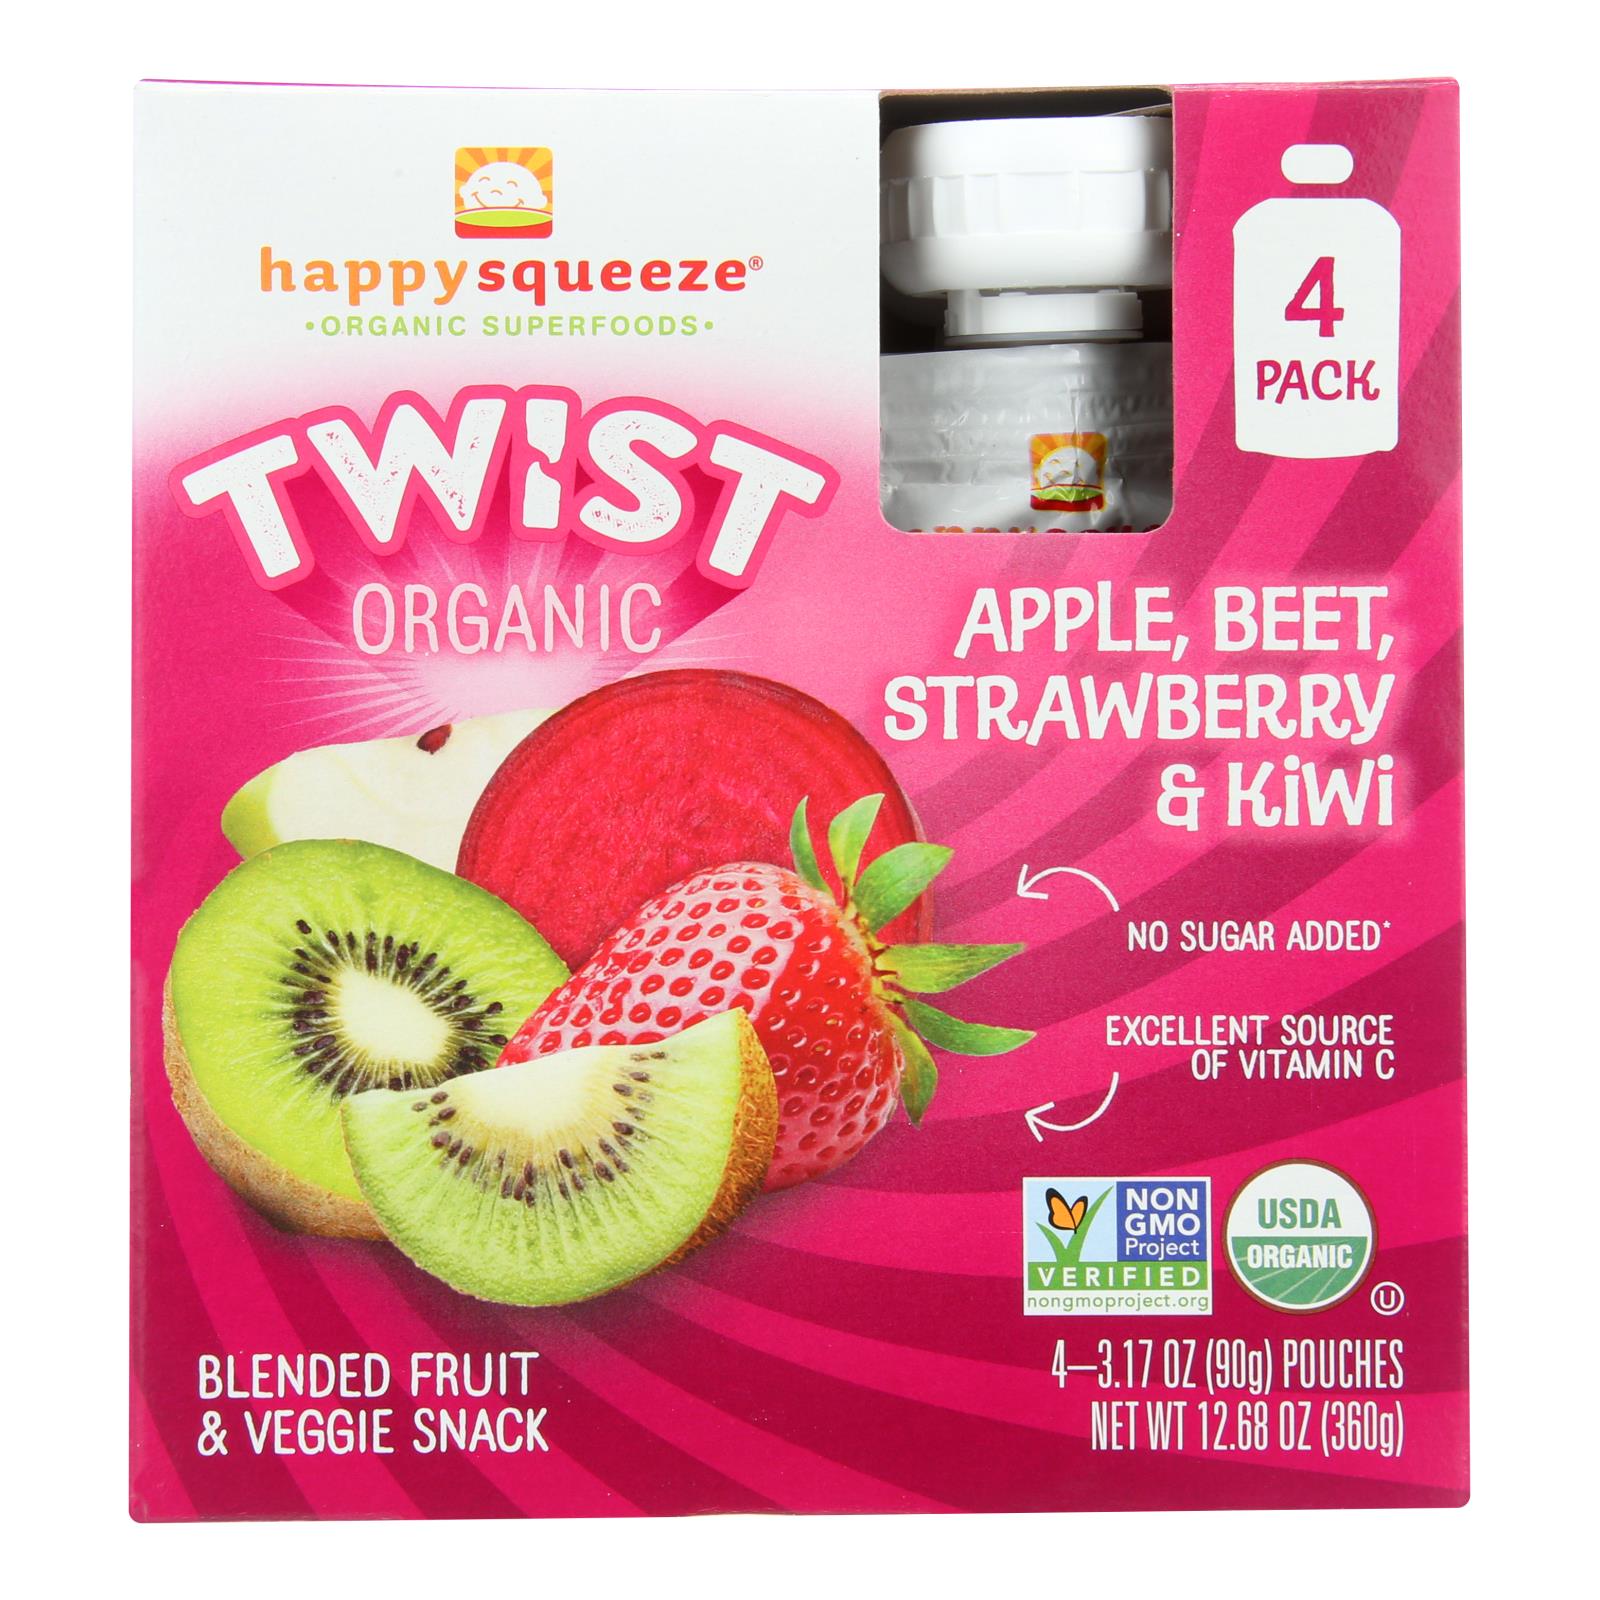 Happy Squeeze Organic Superfoods Twist Organic Blended Fruit & Veggie Snack - Case of 4 - 4/3.17 Z